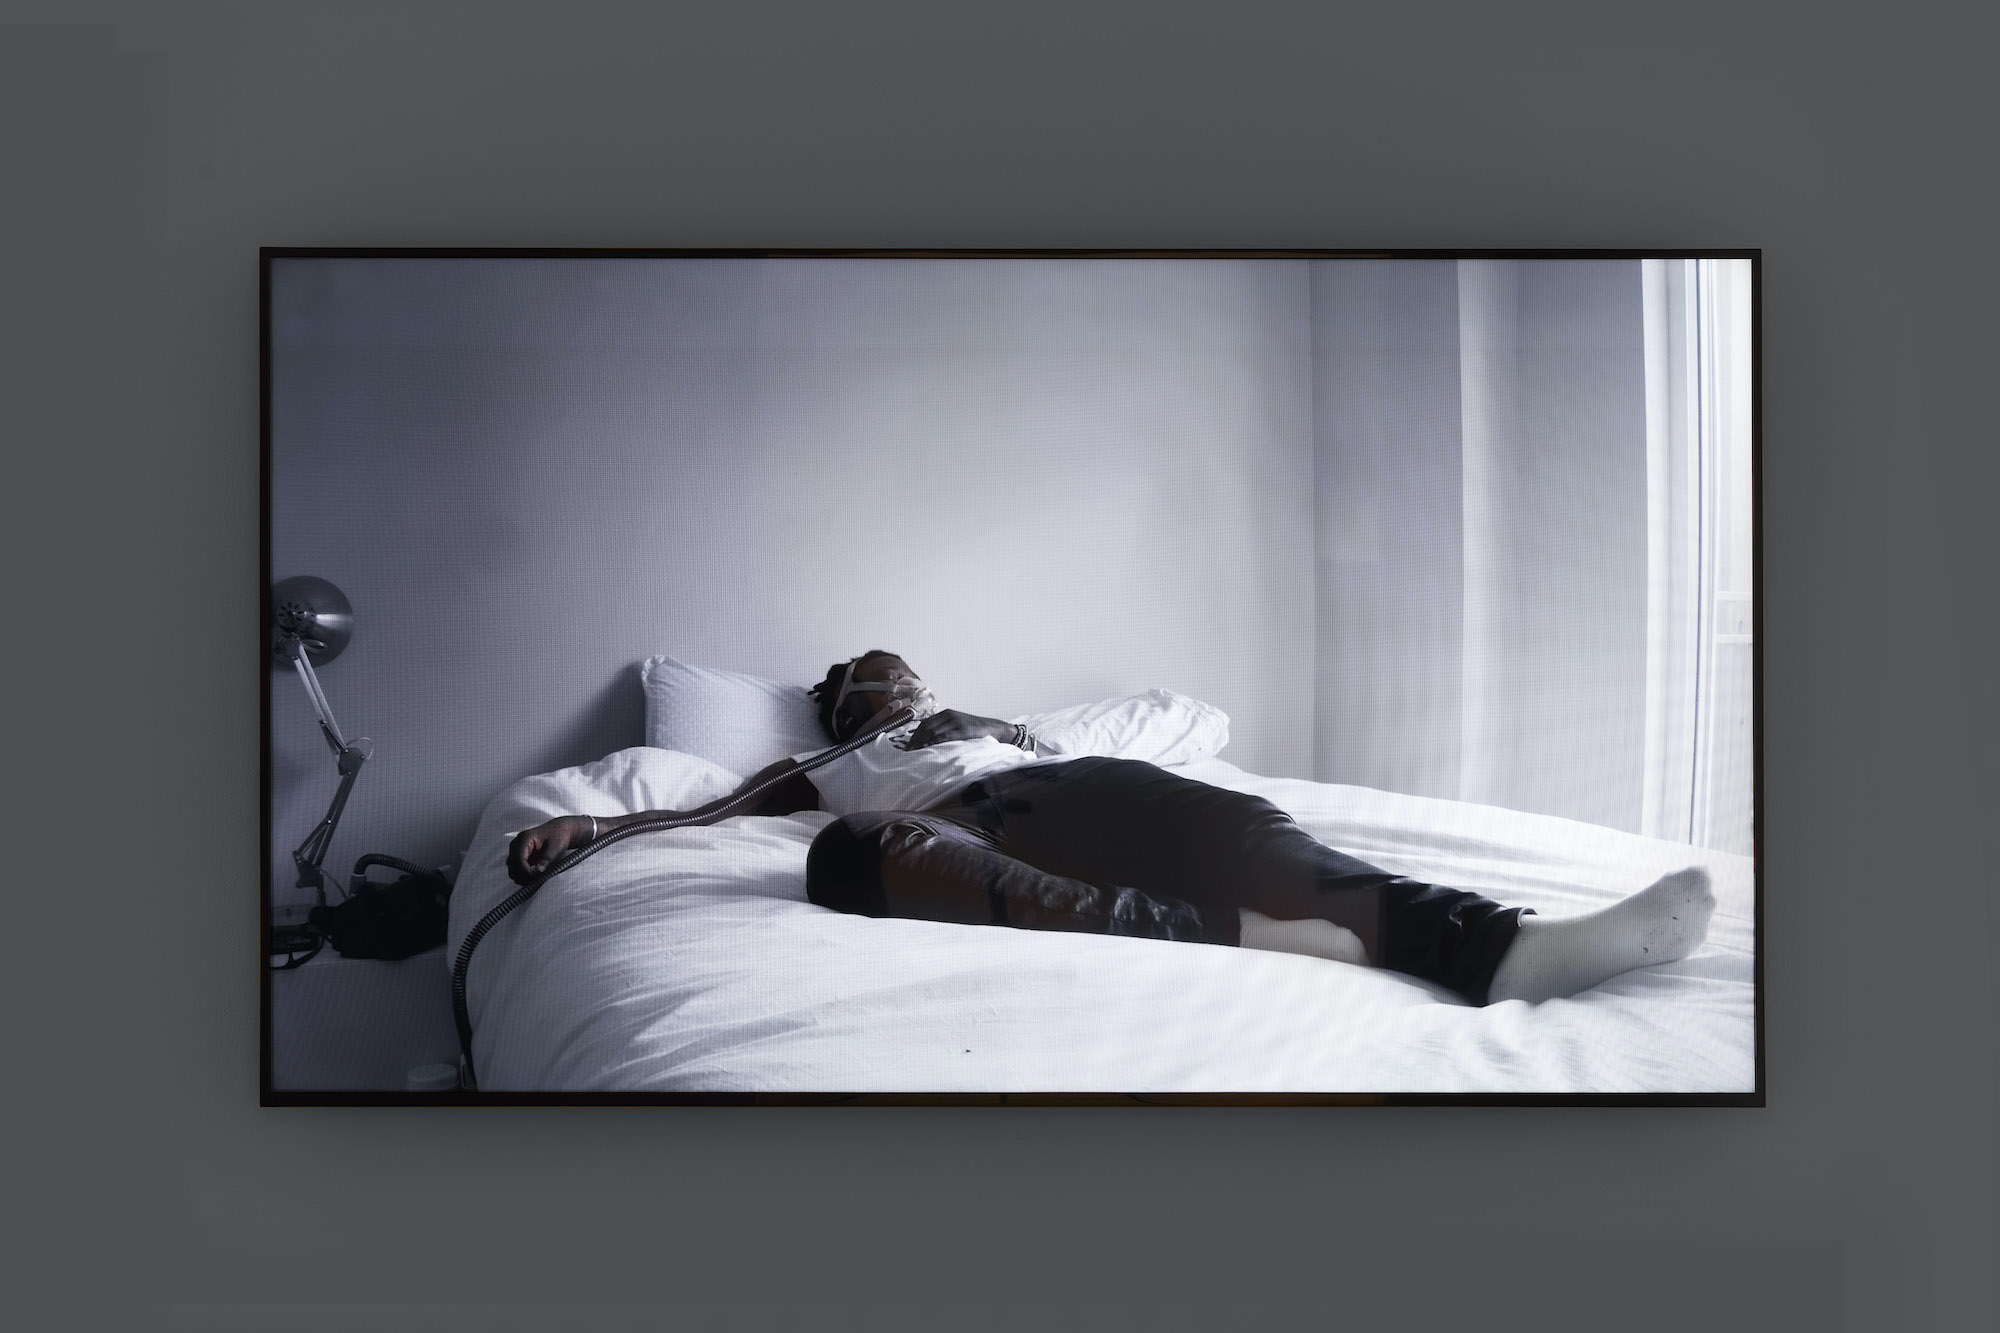 A tv screen displays a video of a person (the artist McClodden) laying on a bed, sprawled out leisurely, with the tendrils of a CPAP machine connected to them.